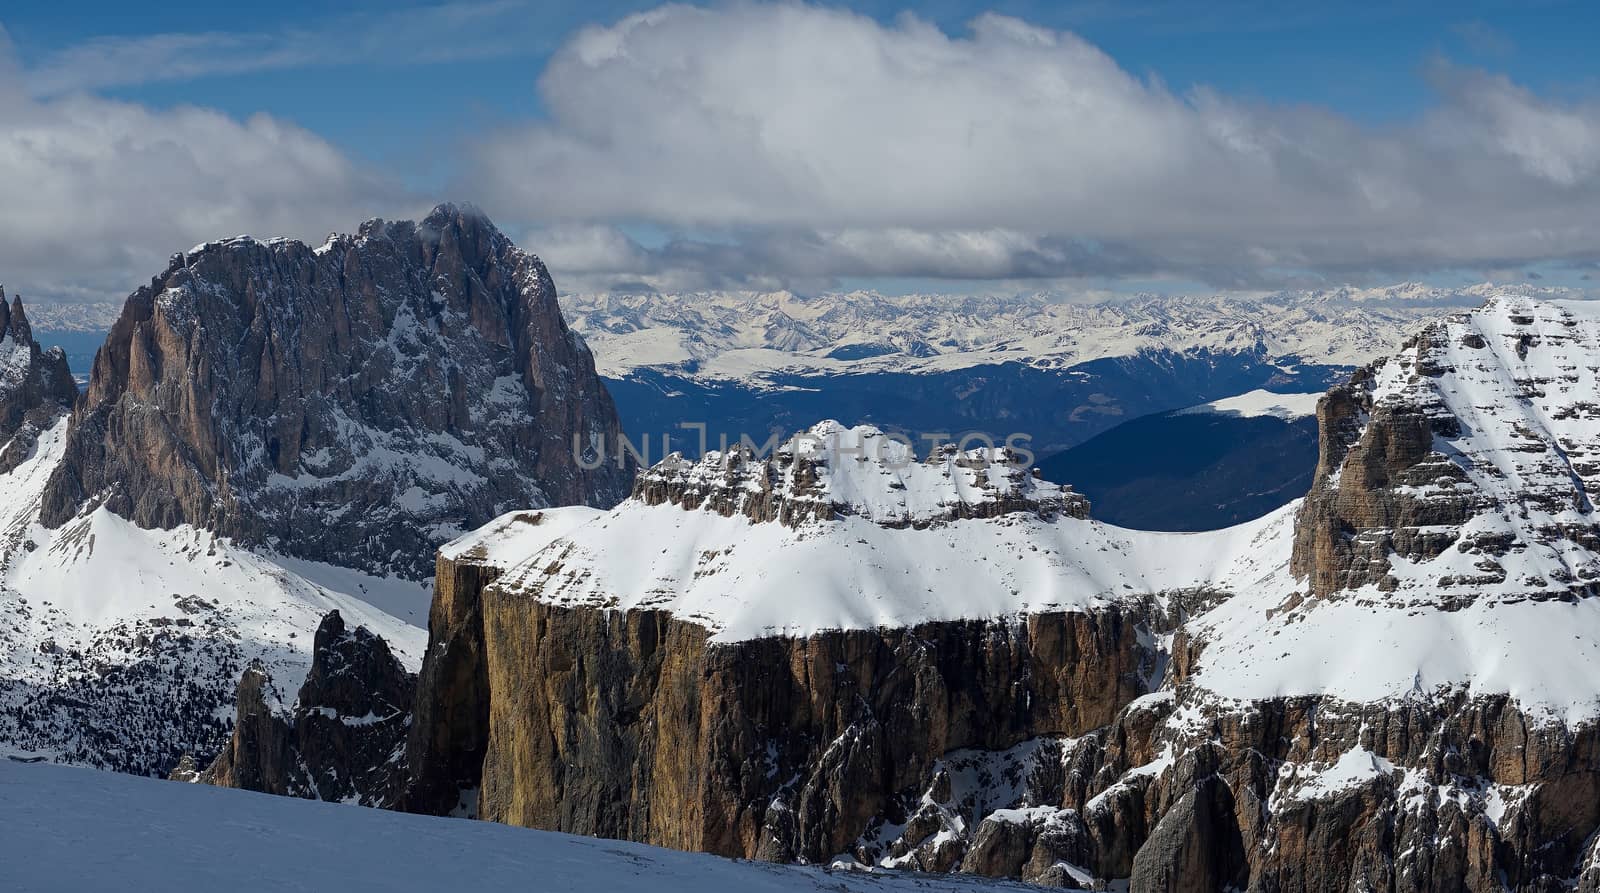 View from Sass Pordoi in the Upper Part of Val di Fassa by phil_bird